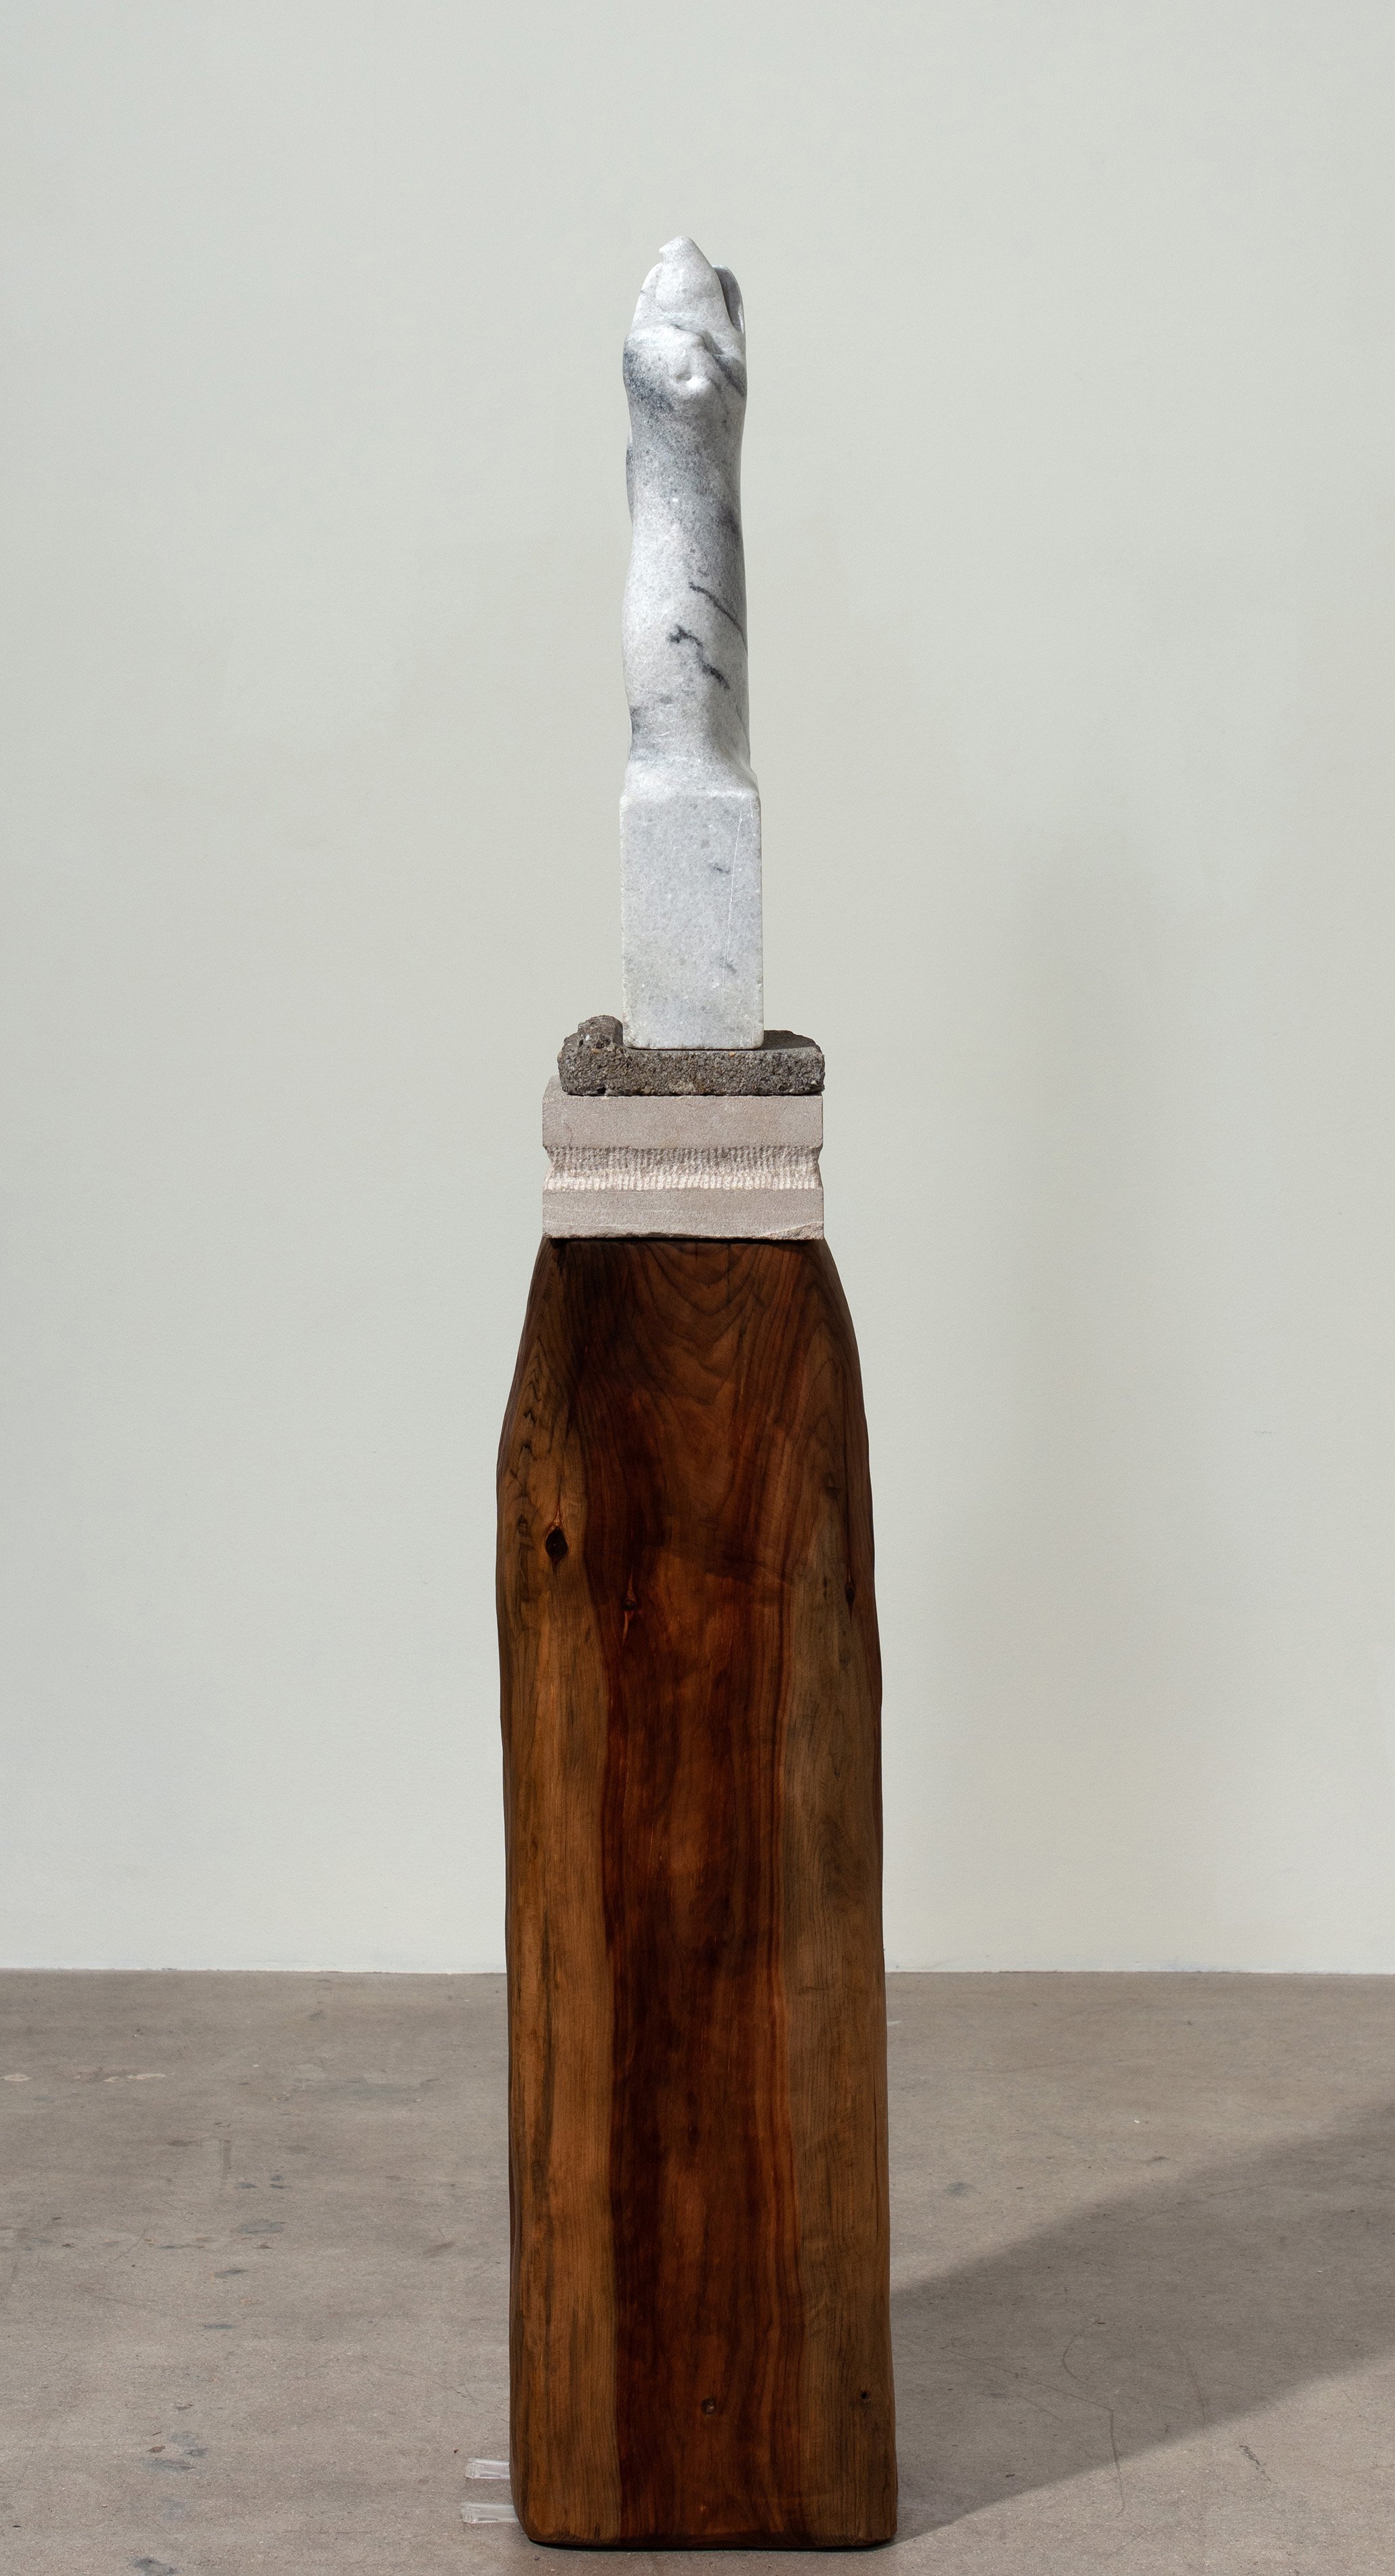   Singing Cat , 2020 Wood, marble, limestone, and concrete 63 1/2 x 10 x 10 inches&nbsp; 